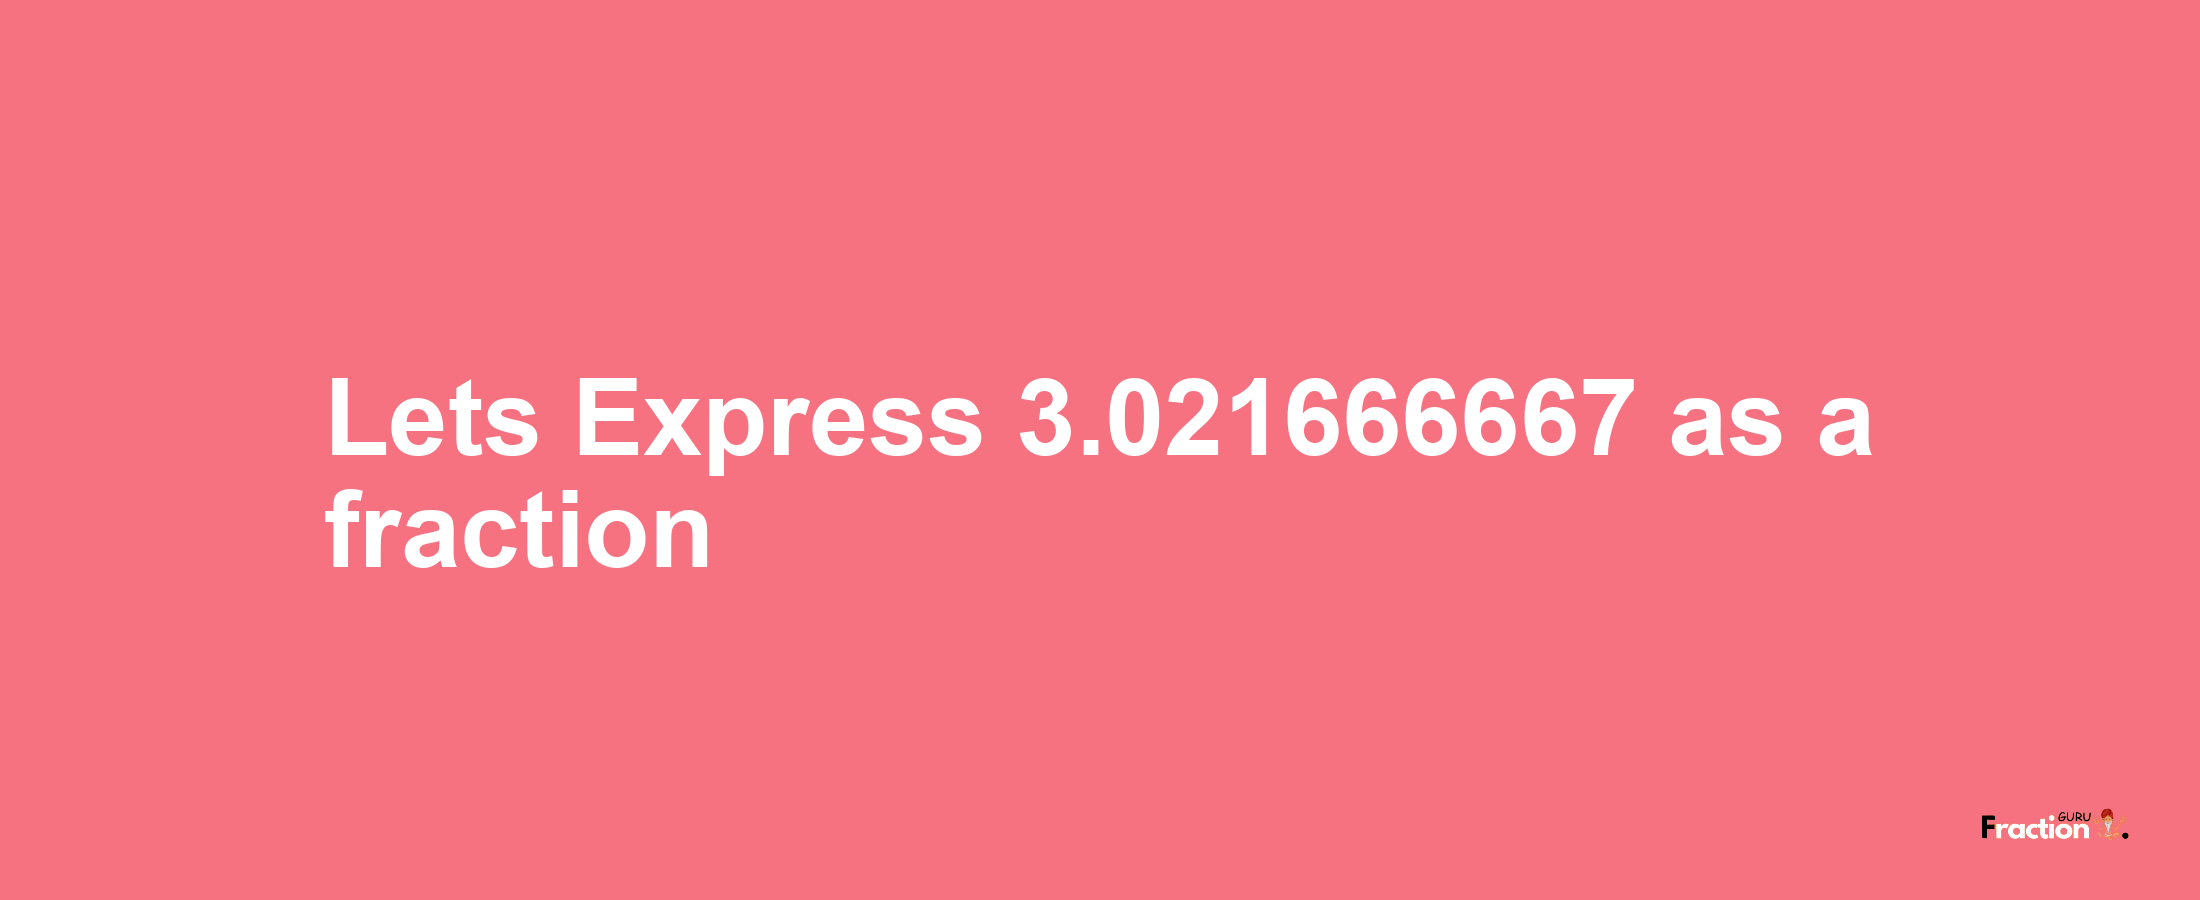 Lets Express 3.021666667 as afraction